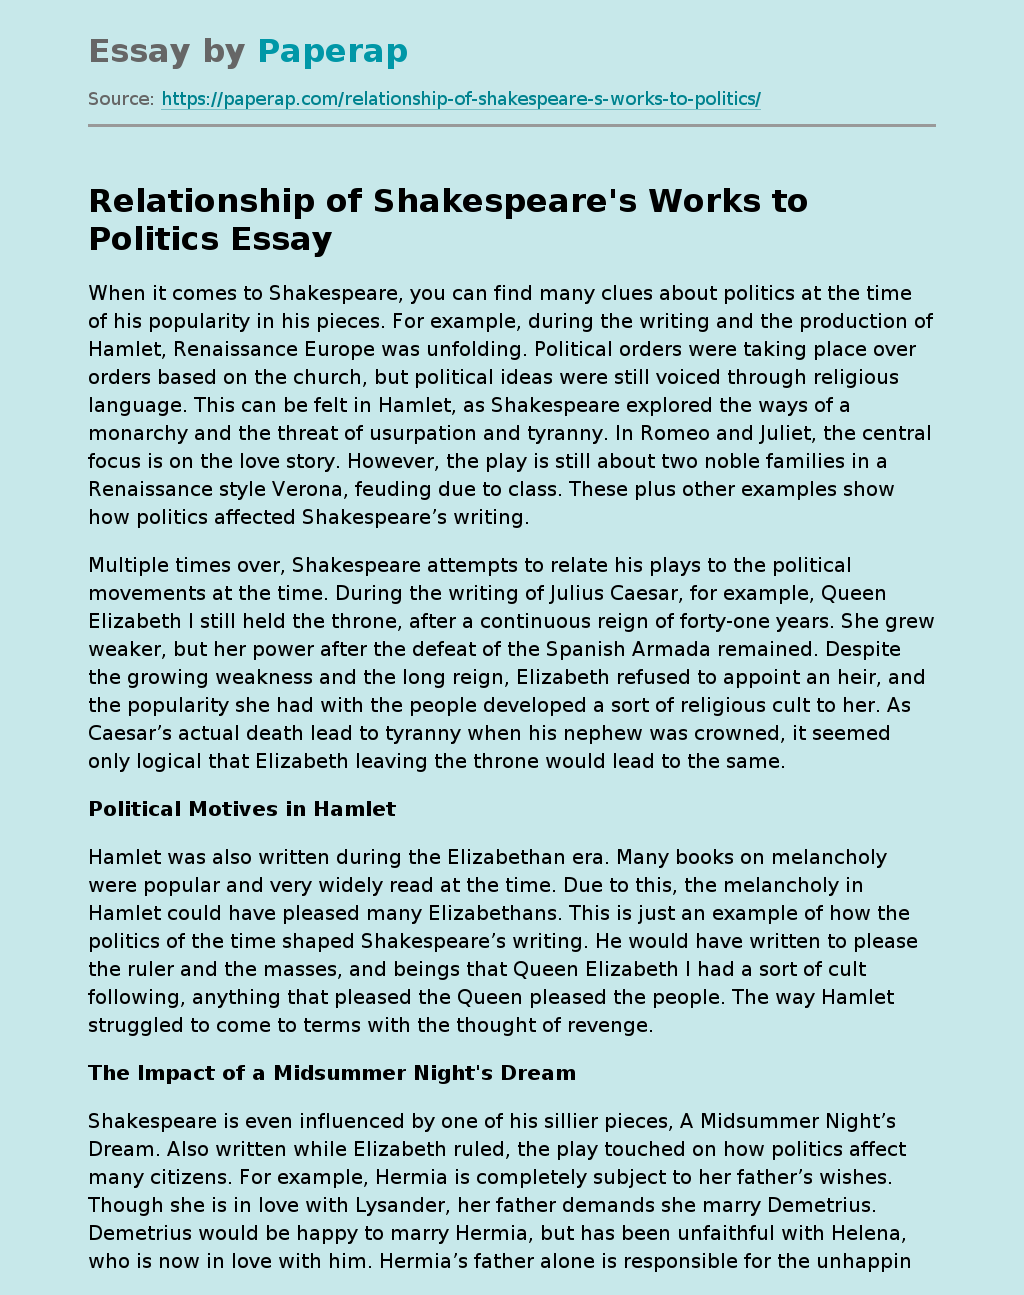 Relationship of Shakespeare's Works to Politics